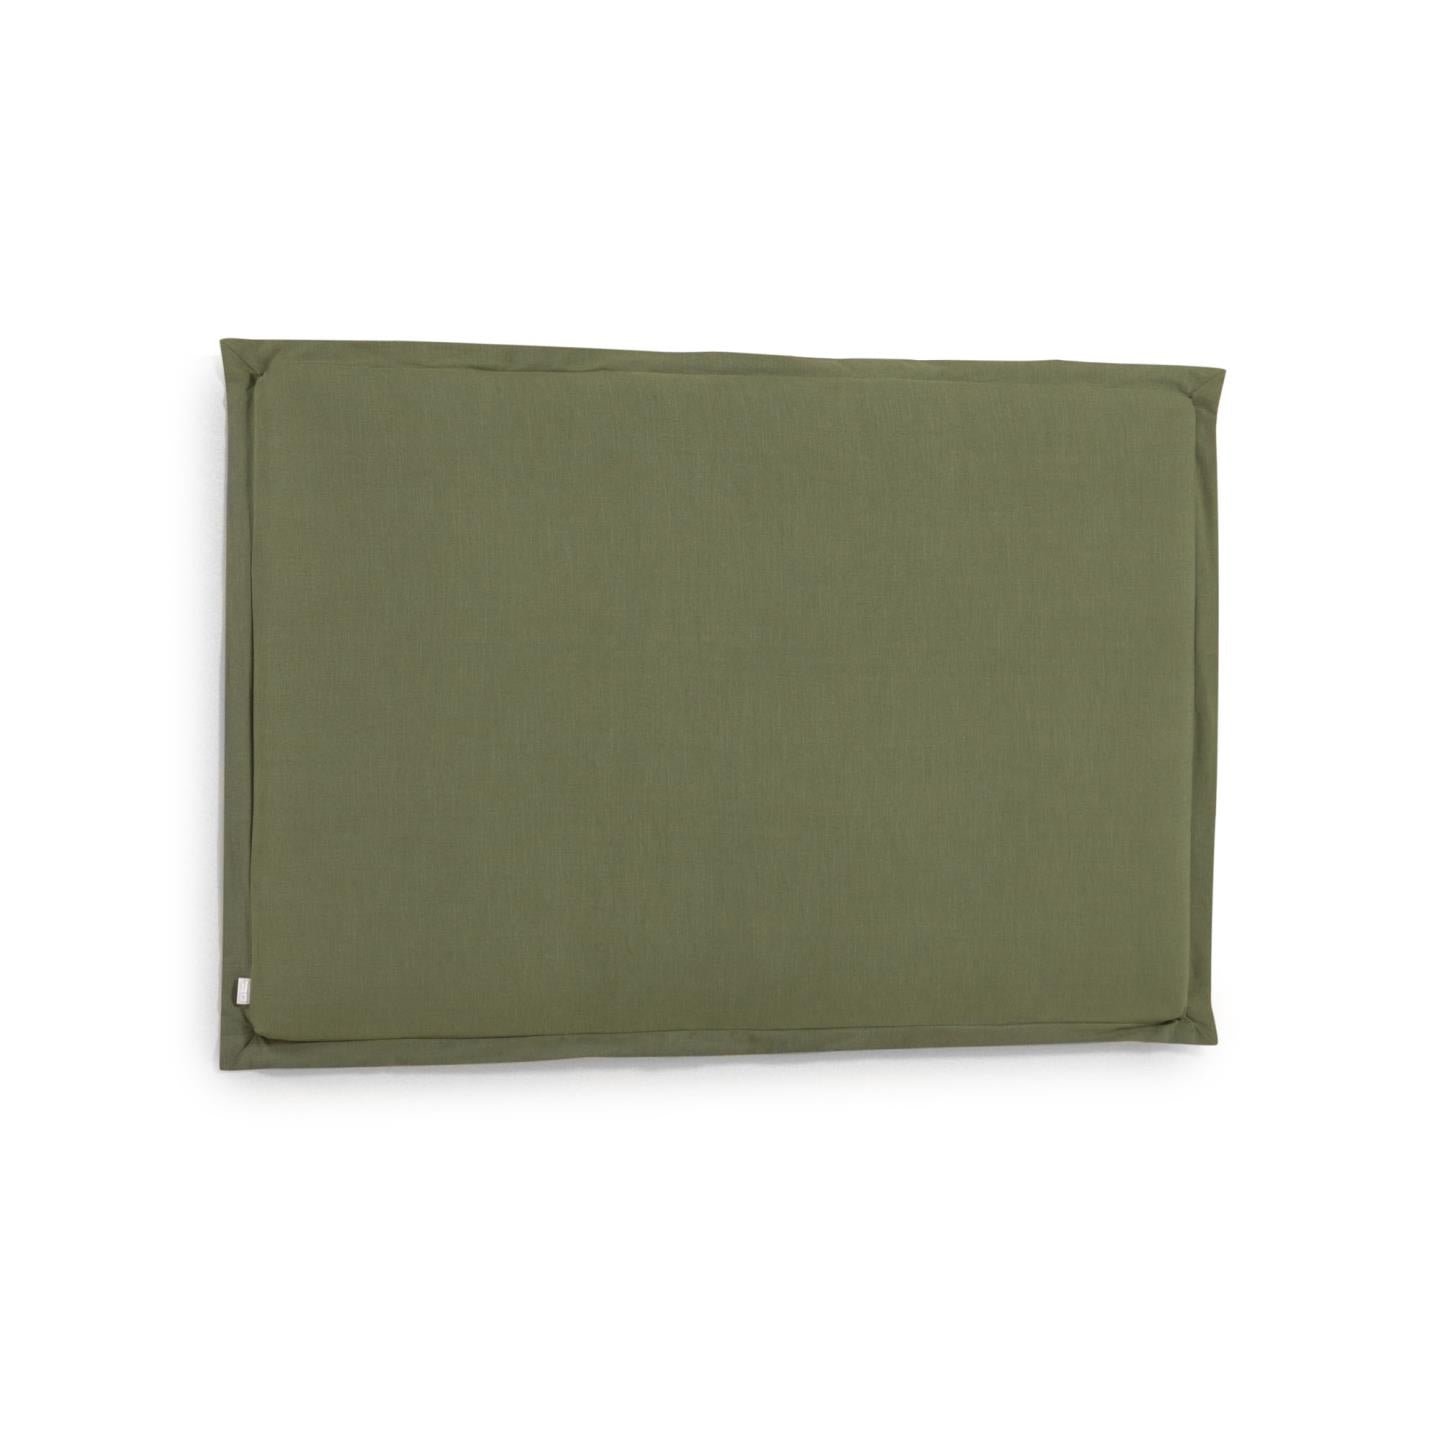 Tanit headboard with green linen removable cover, for 160 cm beds